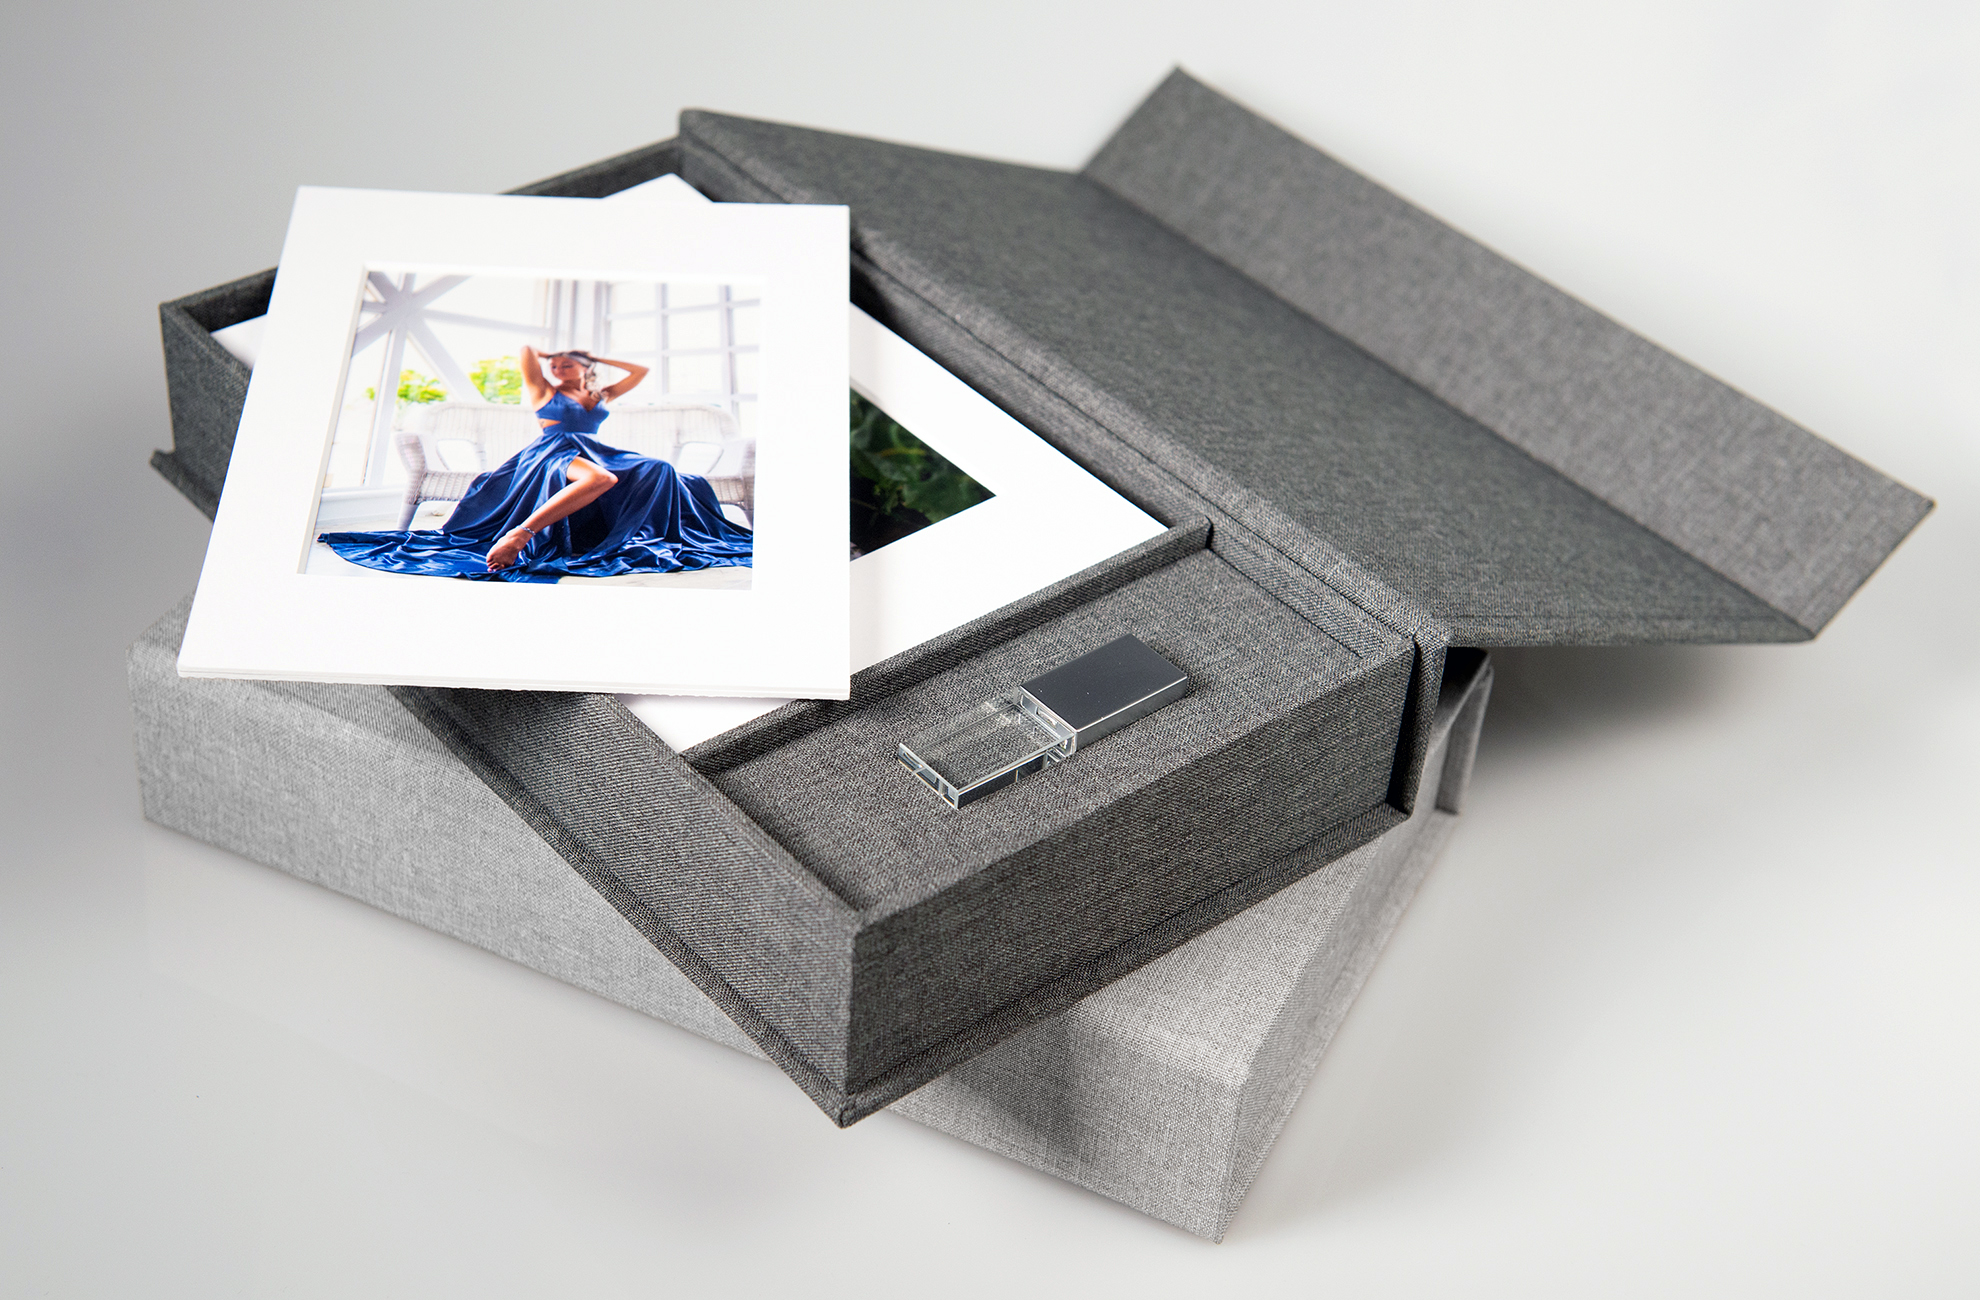 Folio Box with Matted Prints and Crystal Flash Drive